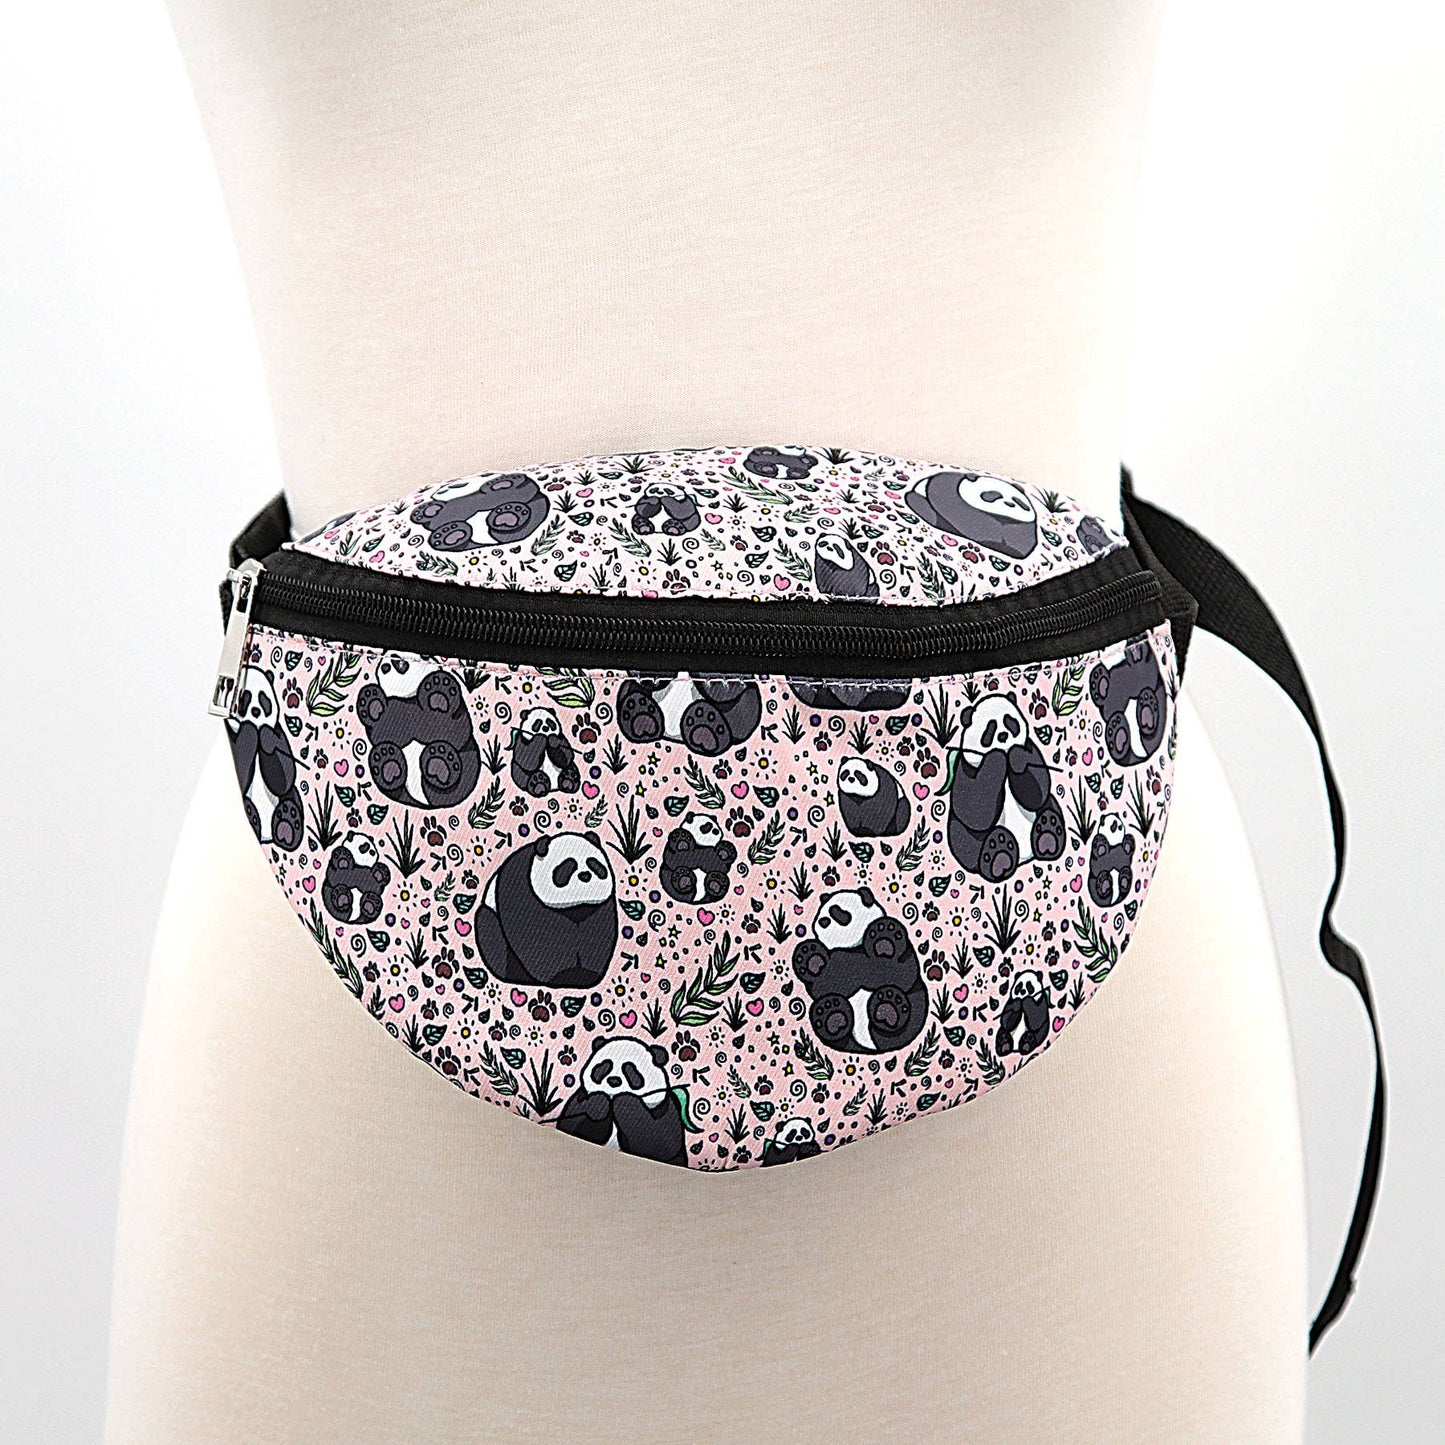 Panda Fanny Pack in Polyester